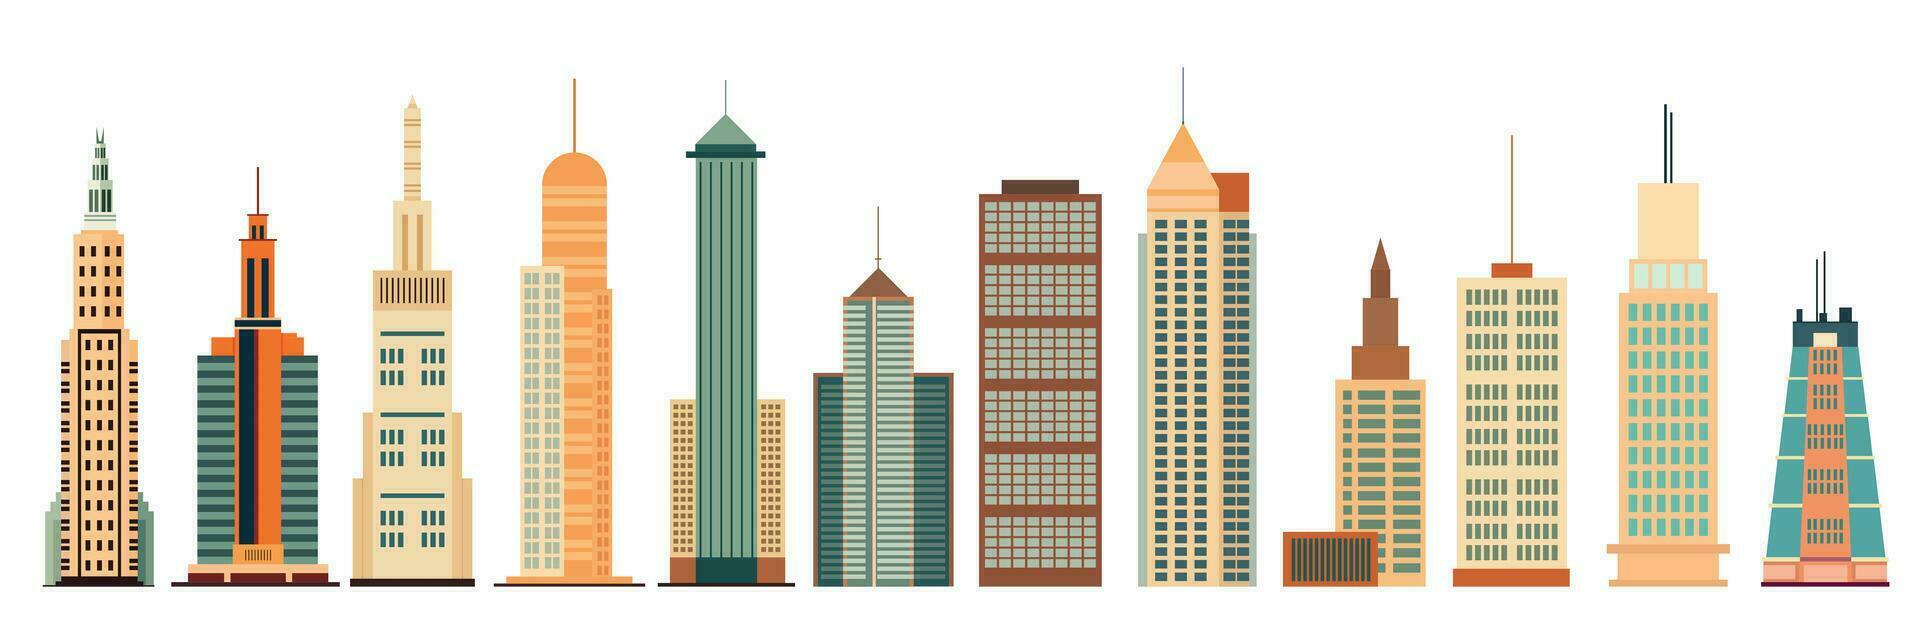 Set of skyscrapers in flat style. Skyscraper isolated on white background. Vector illustration